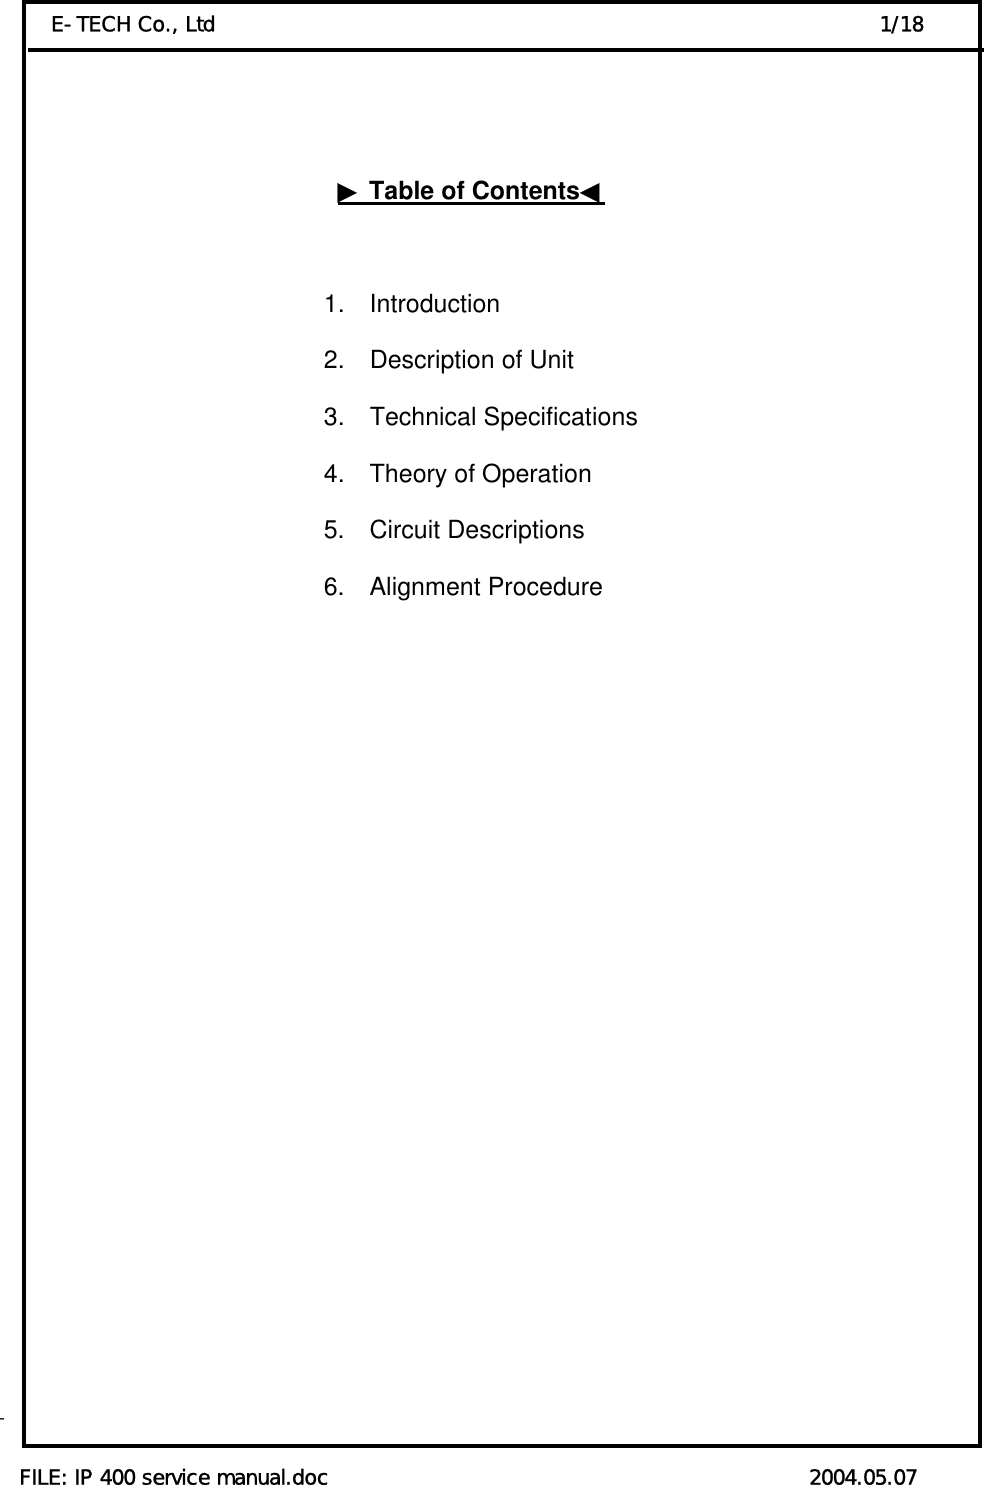  FILE: IP 400 service manual.doc                                               2004.05.07 E-TECH Co., Ltd                                                                 1/18    ▶Table of Contents◀                            1.  Introduction                                          2.  Description of Unit                                          3.  Technical Specifications                                           4.  Theory of Operation 5.  Circuit Descriptions    6.  Alignment Procedure                                                                                                                                                                                                                                         - 